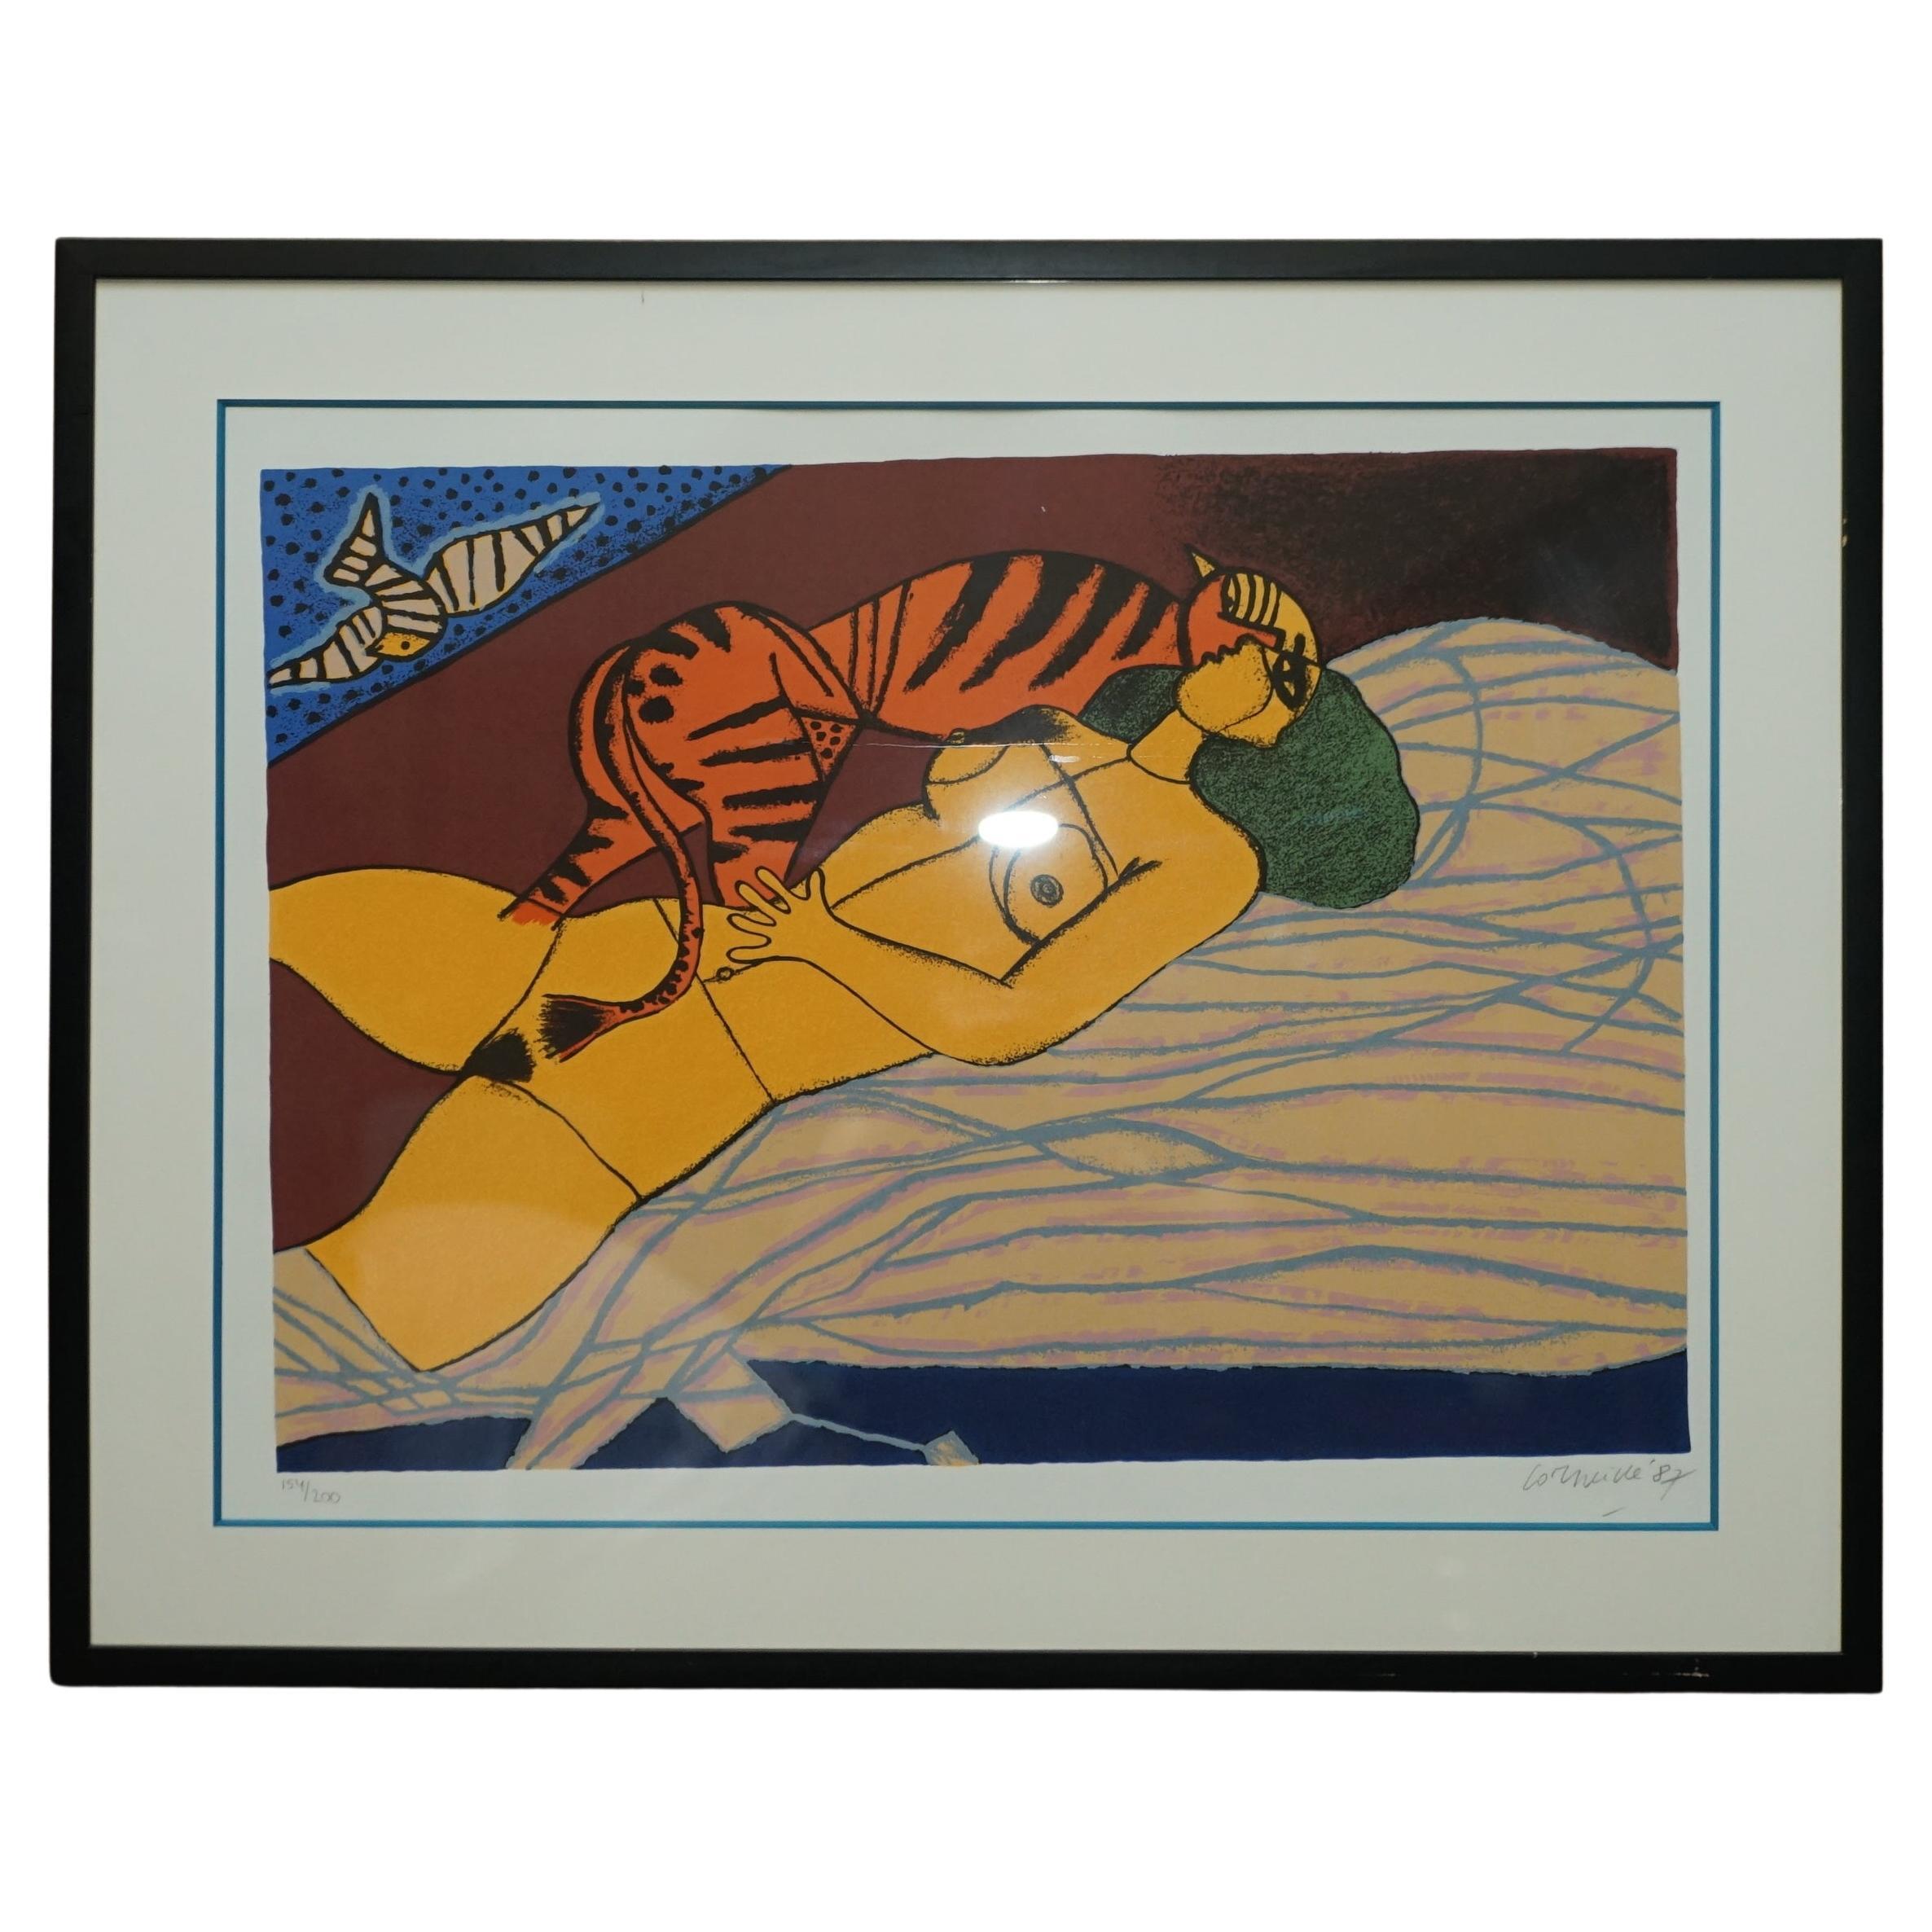 Dutch Corneille 1922 - 2010 Limited Edition Lithograph Print of Women & Tiger 87